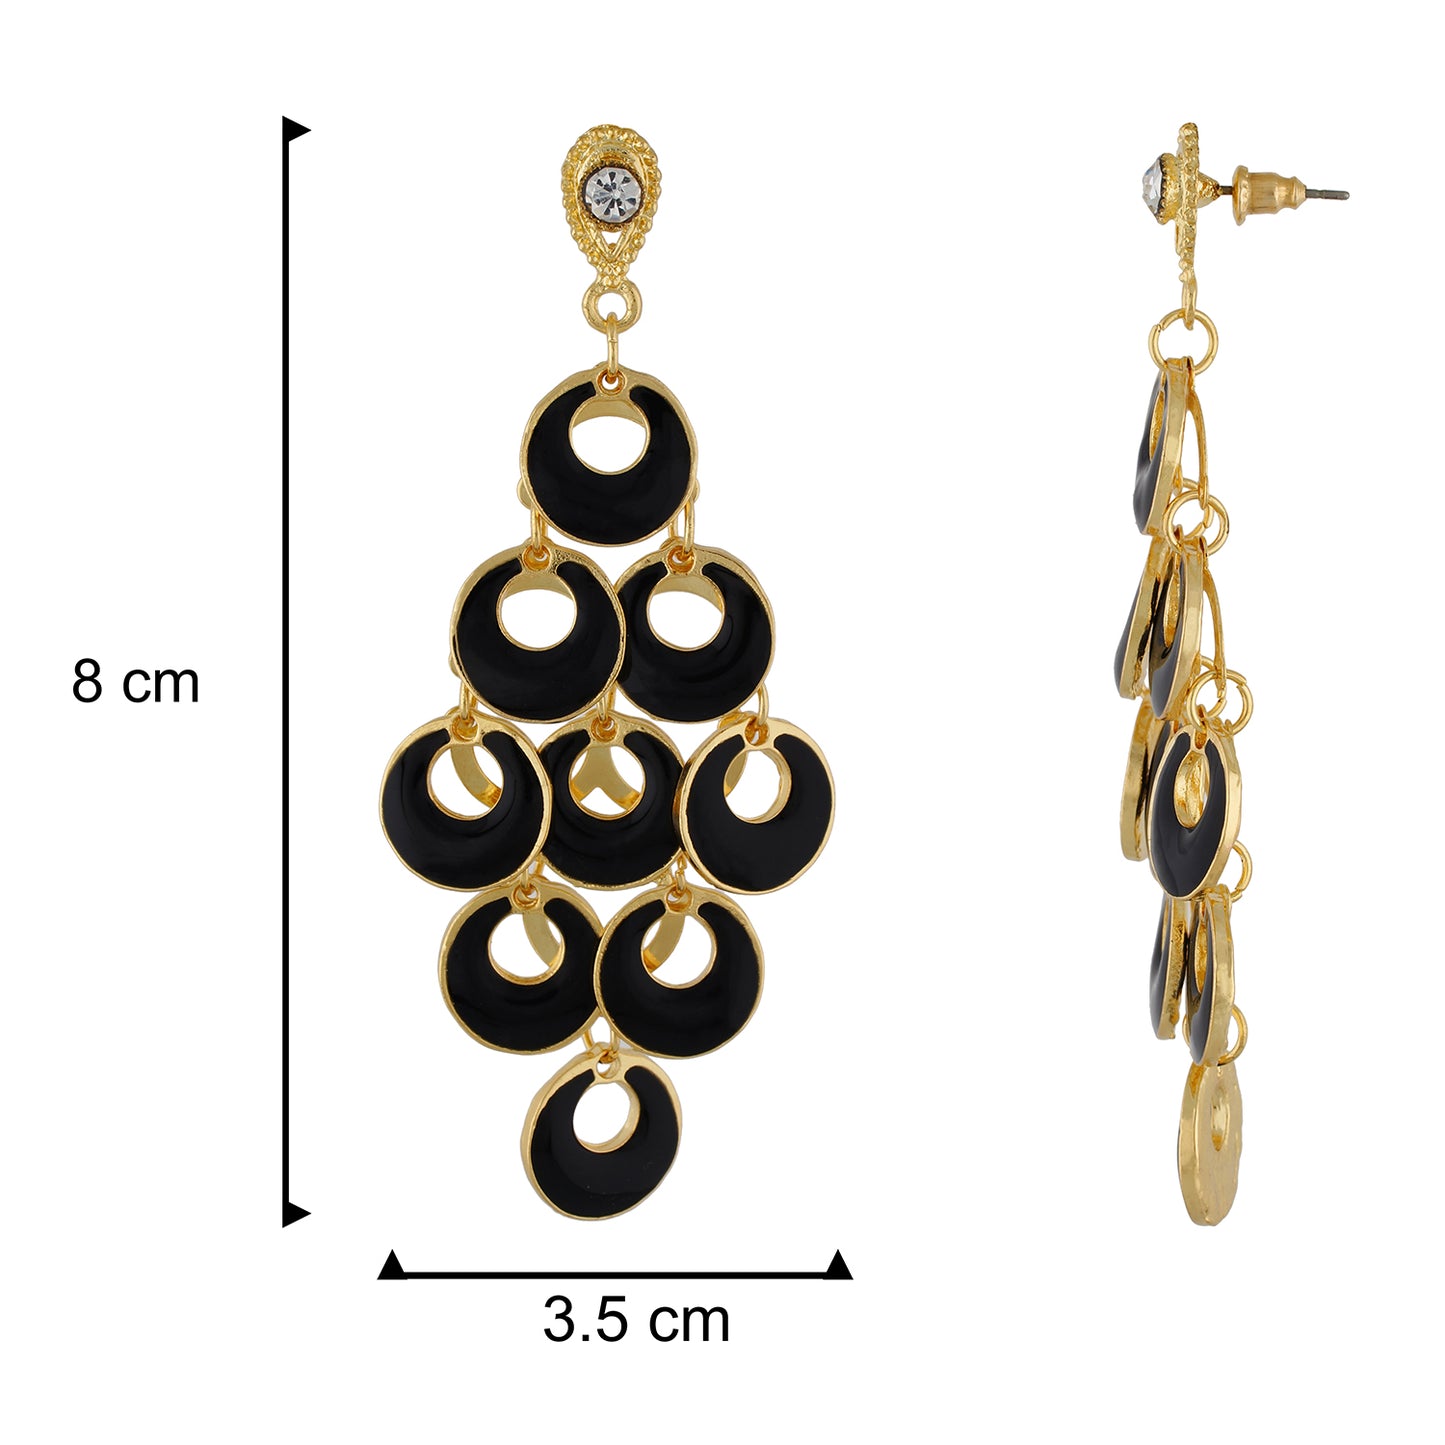 Dashing Black and Gold Colour Bunch of Circles Design Earring for Girls and Women